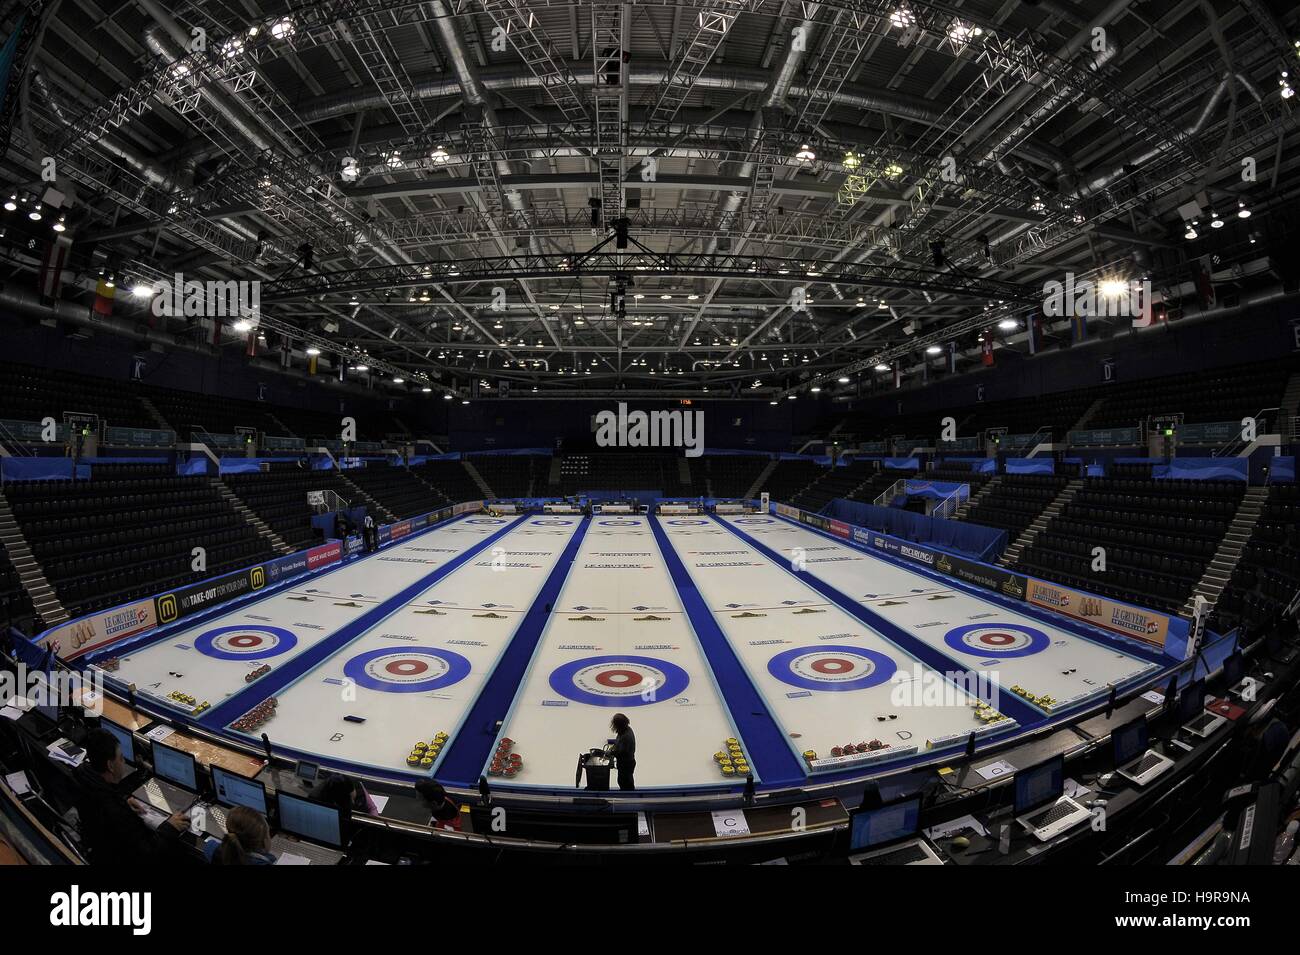 Glasgow, Scotland, UK. 24th Nov, 2016.General view of the Braehead arena when empty of spectators. Mens semi finals. Le Gruyère AOP European Curling Championships 2016. Intu Braehead Arena. Glasgow. Renfrewshire. Scotland. UK. 24/11/2016. Credit:  Sport In Pictures/Alamy Live News Stock Photo